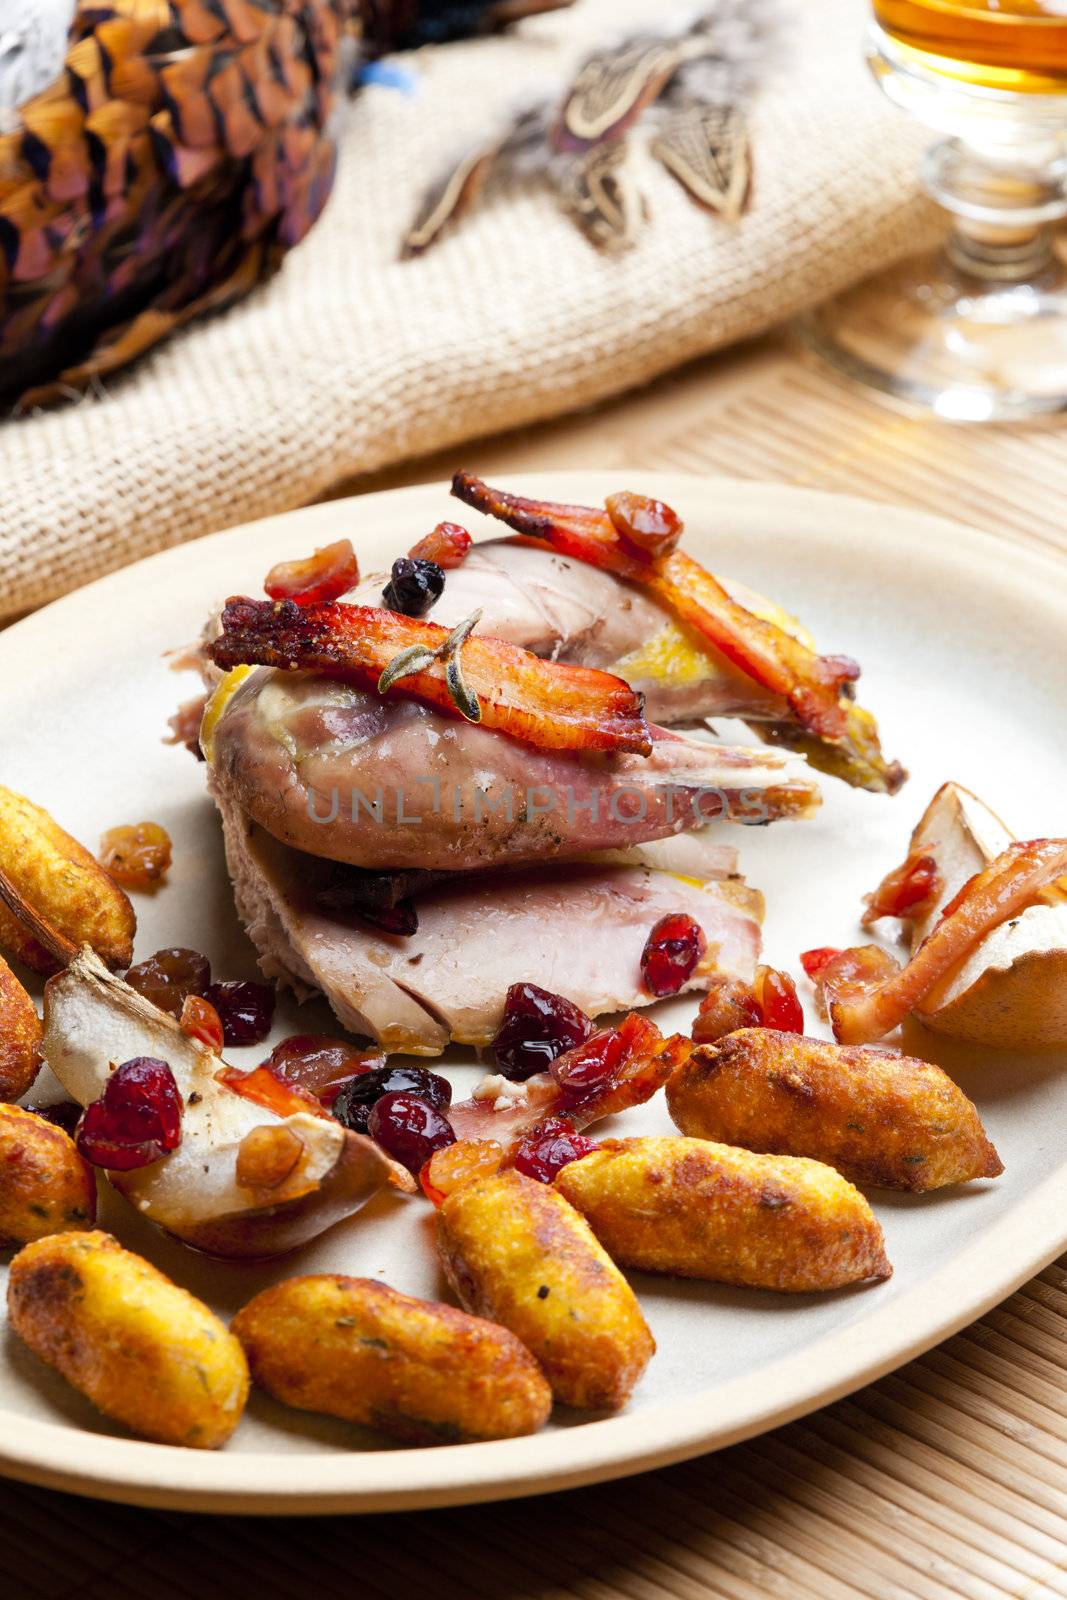 baked pheasant with bacon, pear, raisins on brandy by phbcz